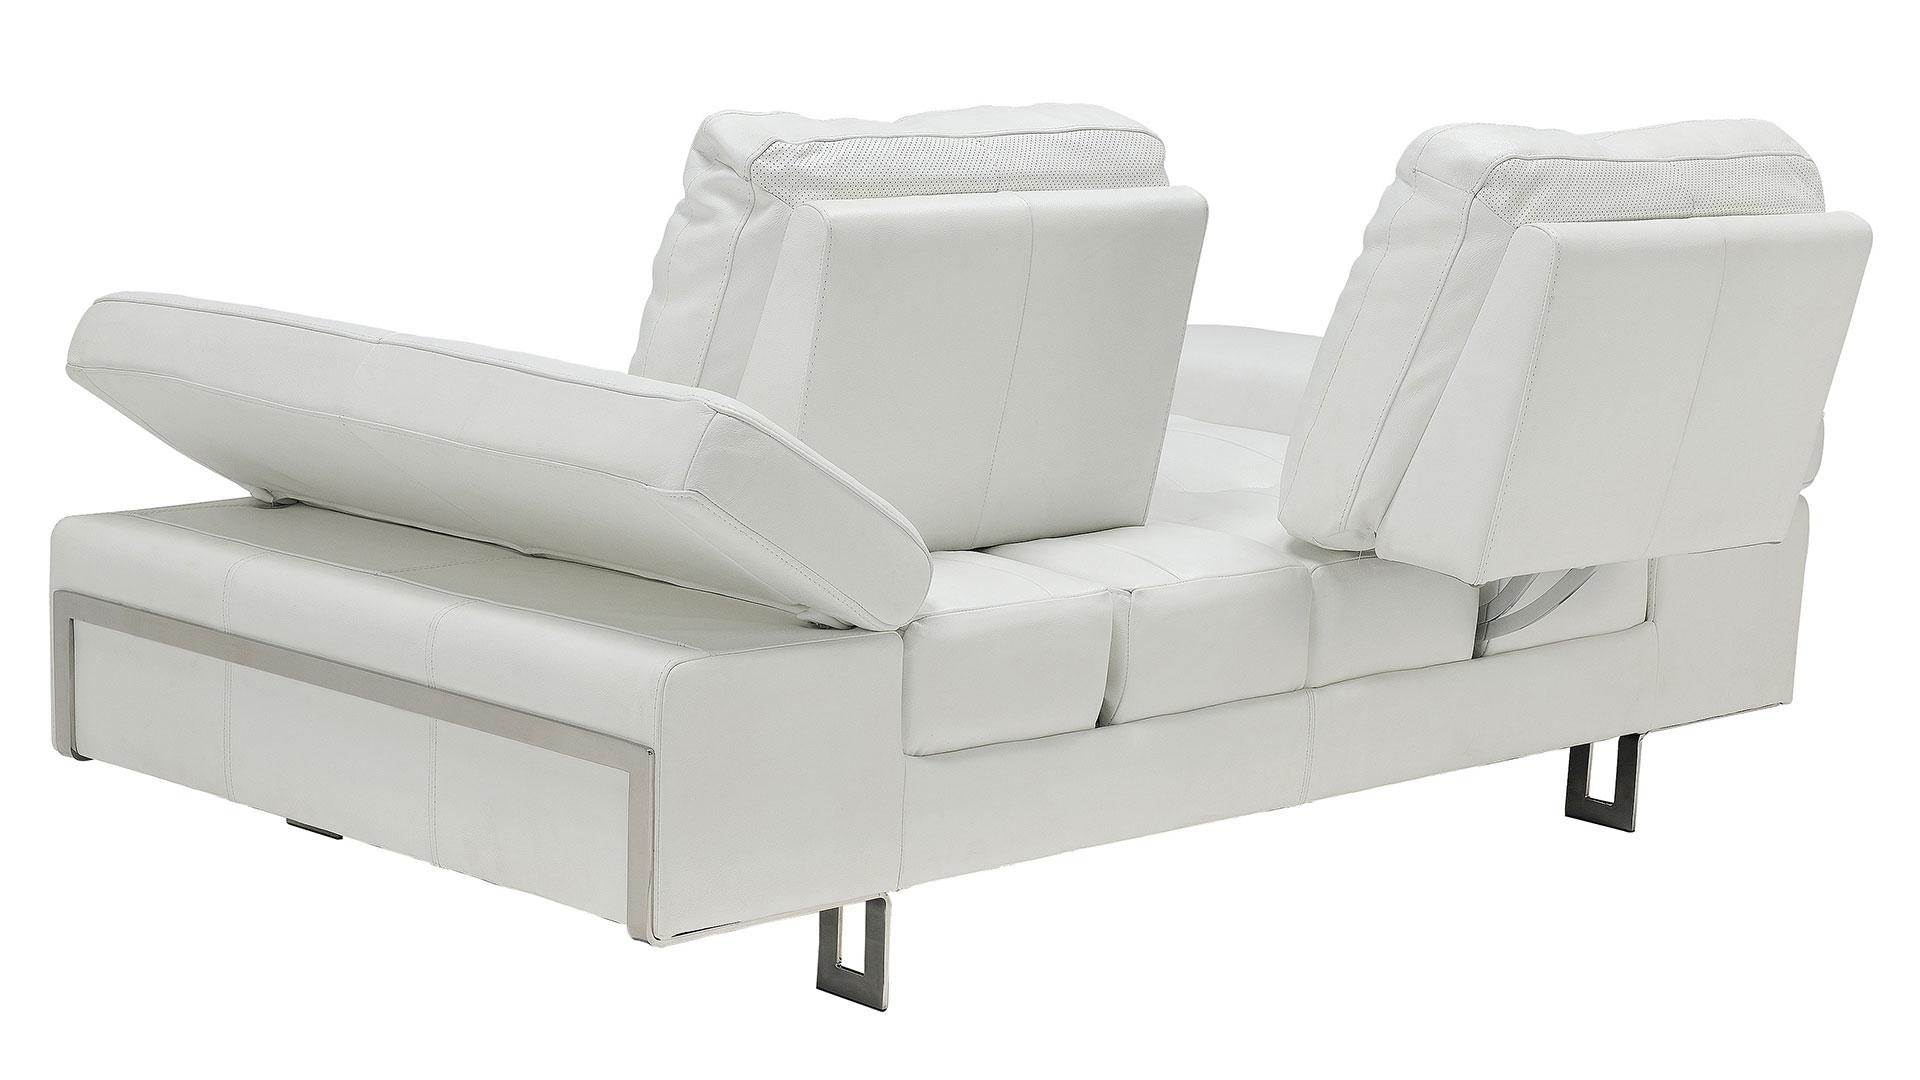 

    
At Home USA Gia White Luxury Italian Leather Ultra Modern Loveseat Contemporary
